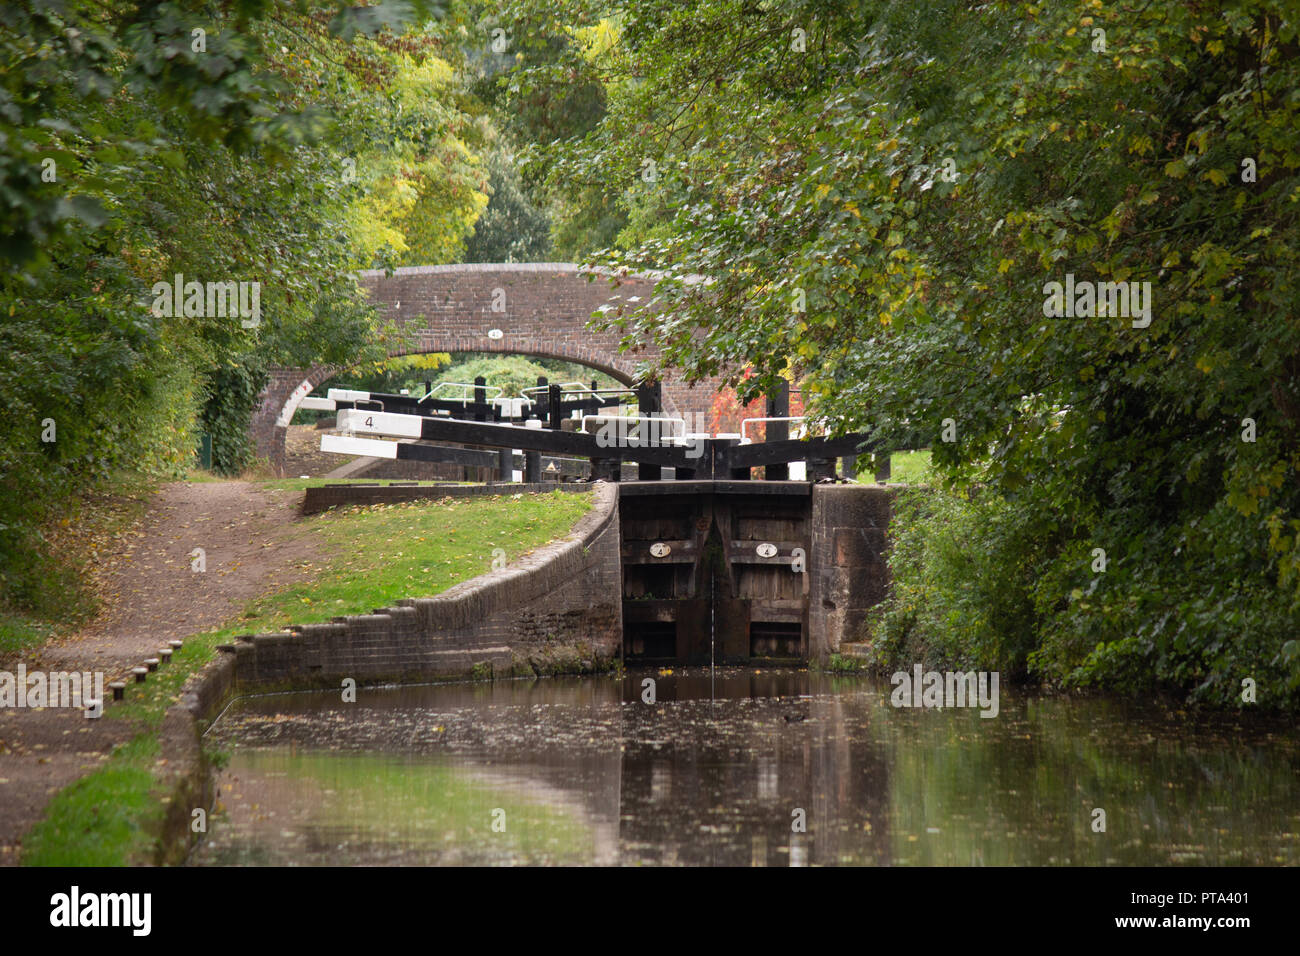 The Coventry canal in Atherstone, North Warwickshire, England. A lock and towpath near the Town Centre. Stock Photo